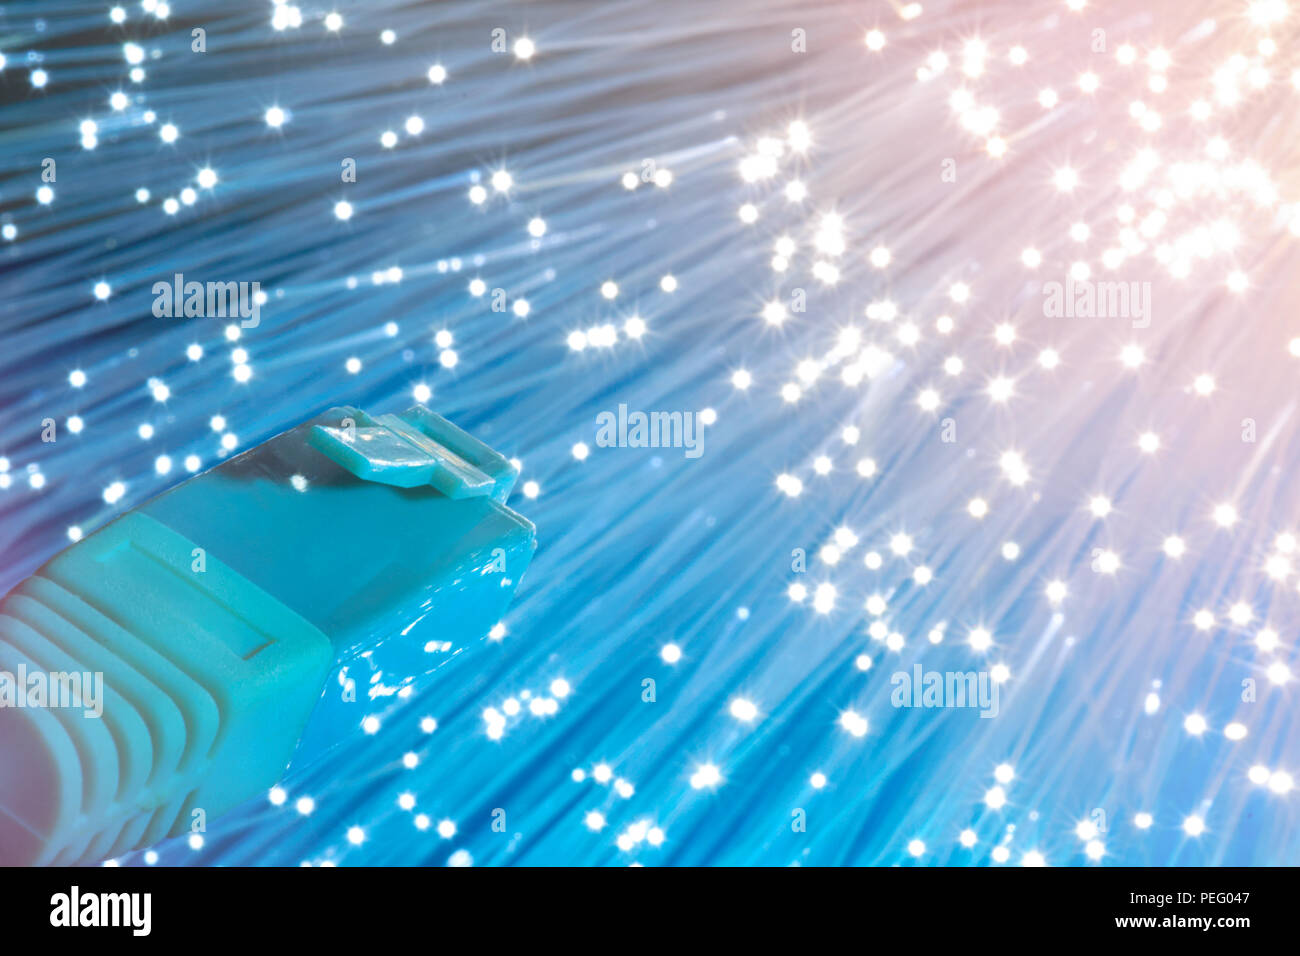 Futuristic technological background, closeup on the end of optical fiber network cable on blue and cream background. Shallow DOF, partial focus on the Stock Photo